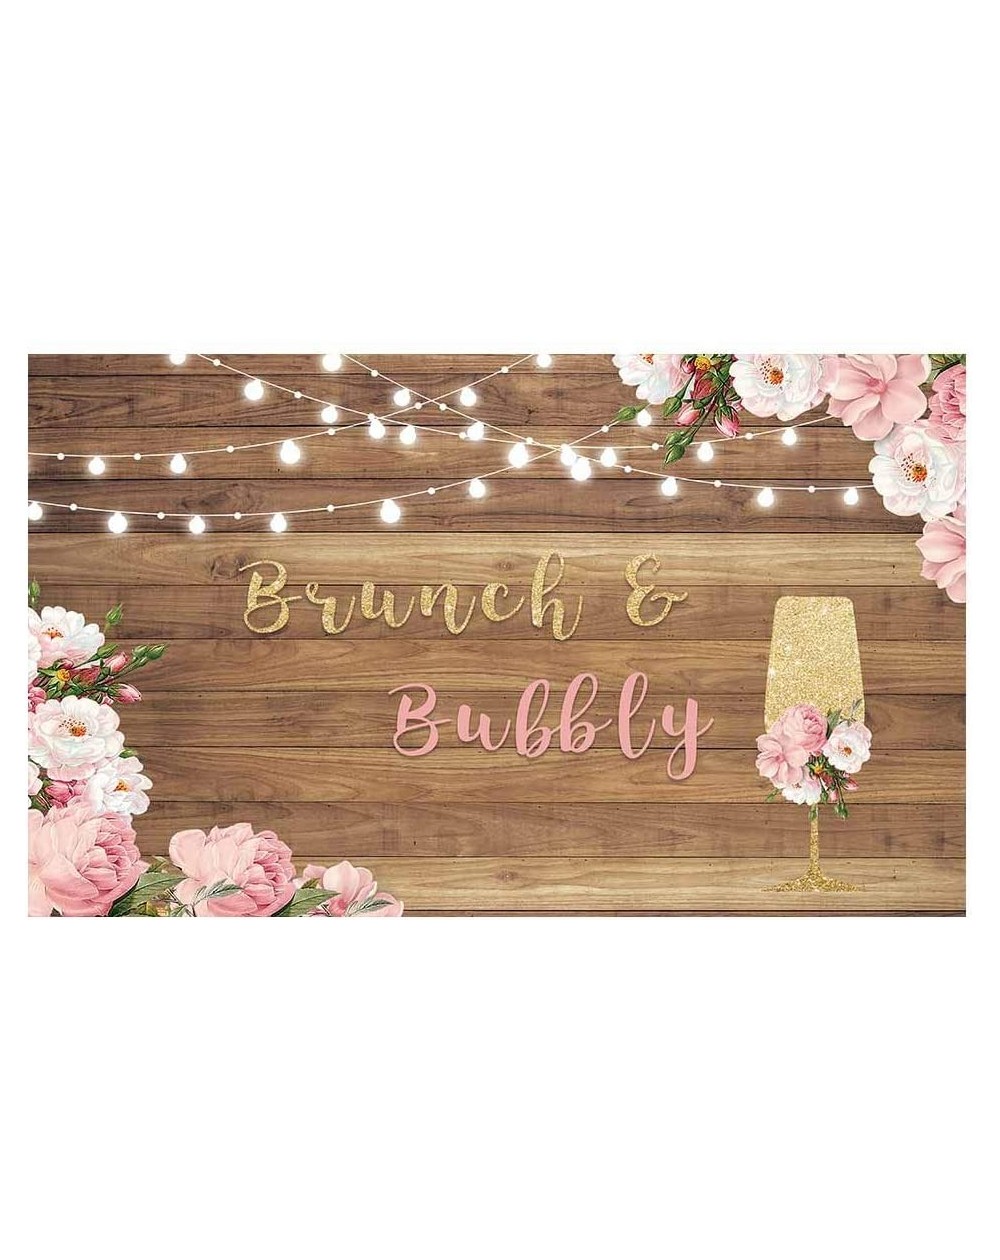 Photobooth Props Brunch and Bubbly Backdrop for Bridal Shower Party Rustic Wood Floor Pink Floral Photography Background Gold...